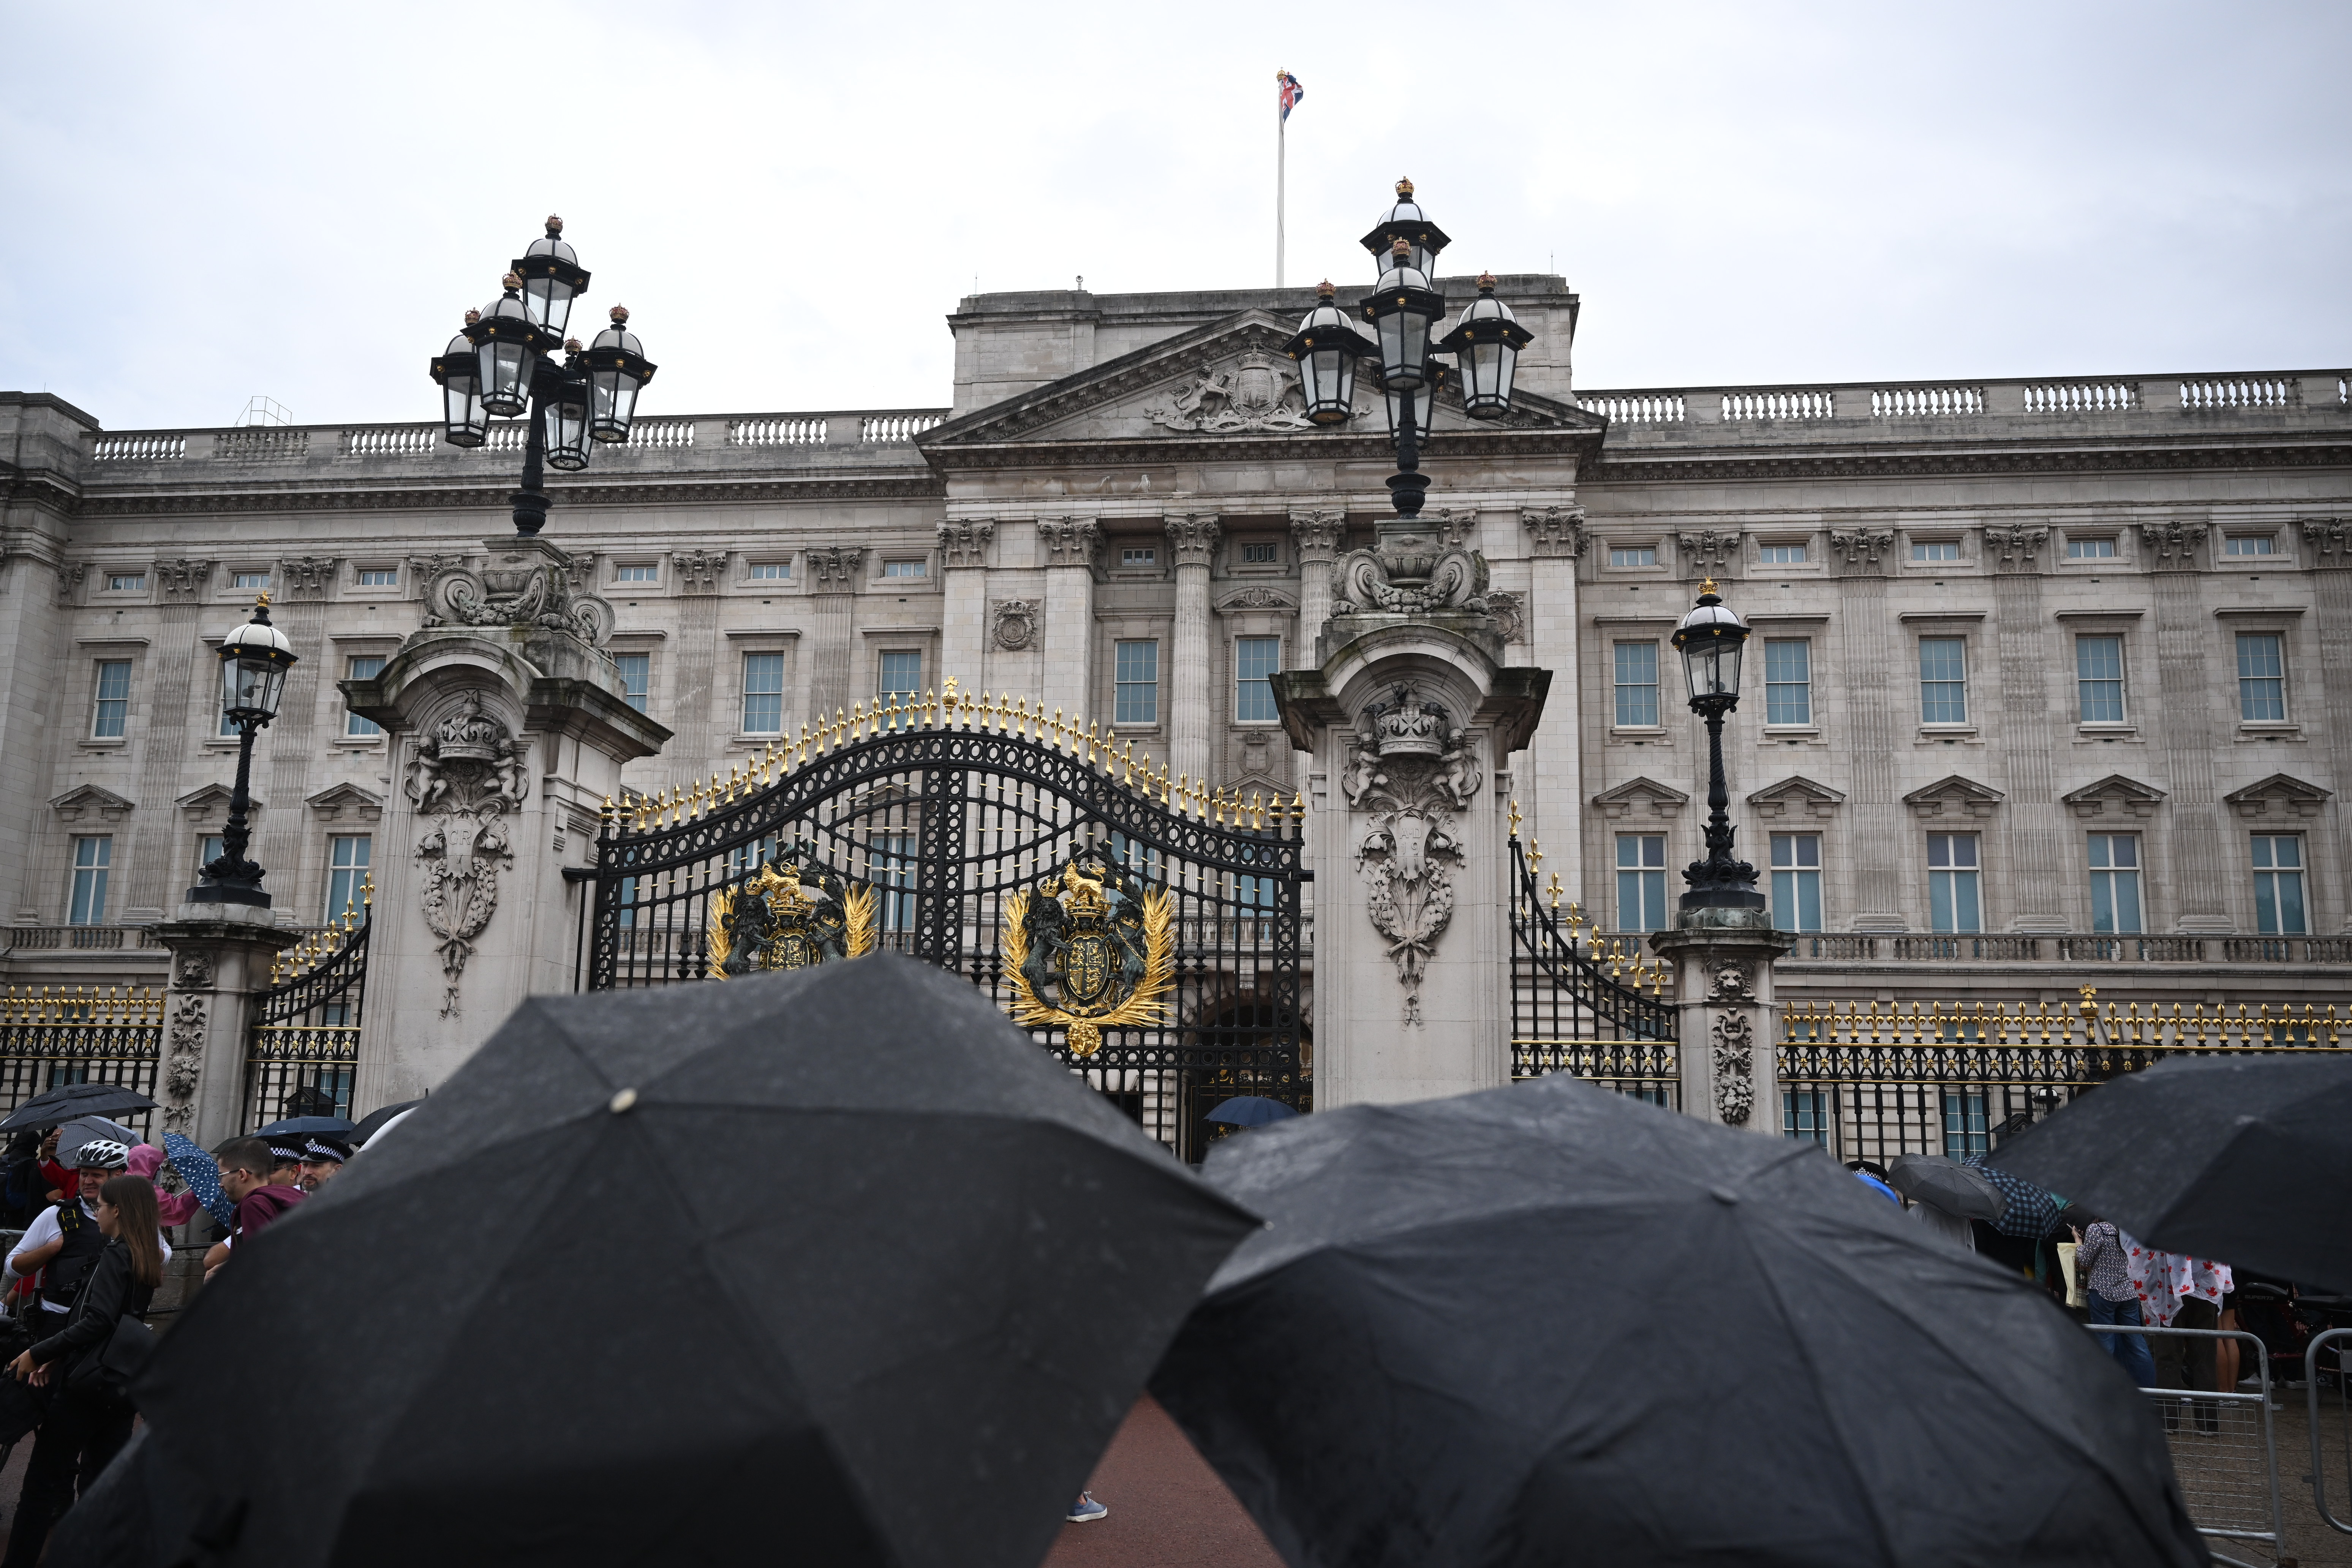 People stand under black umbrellas in front of Buckingham Palace.